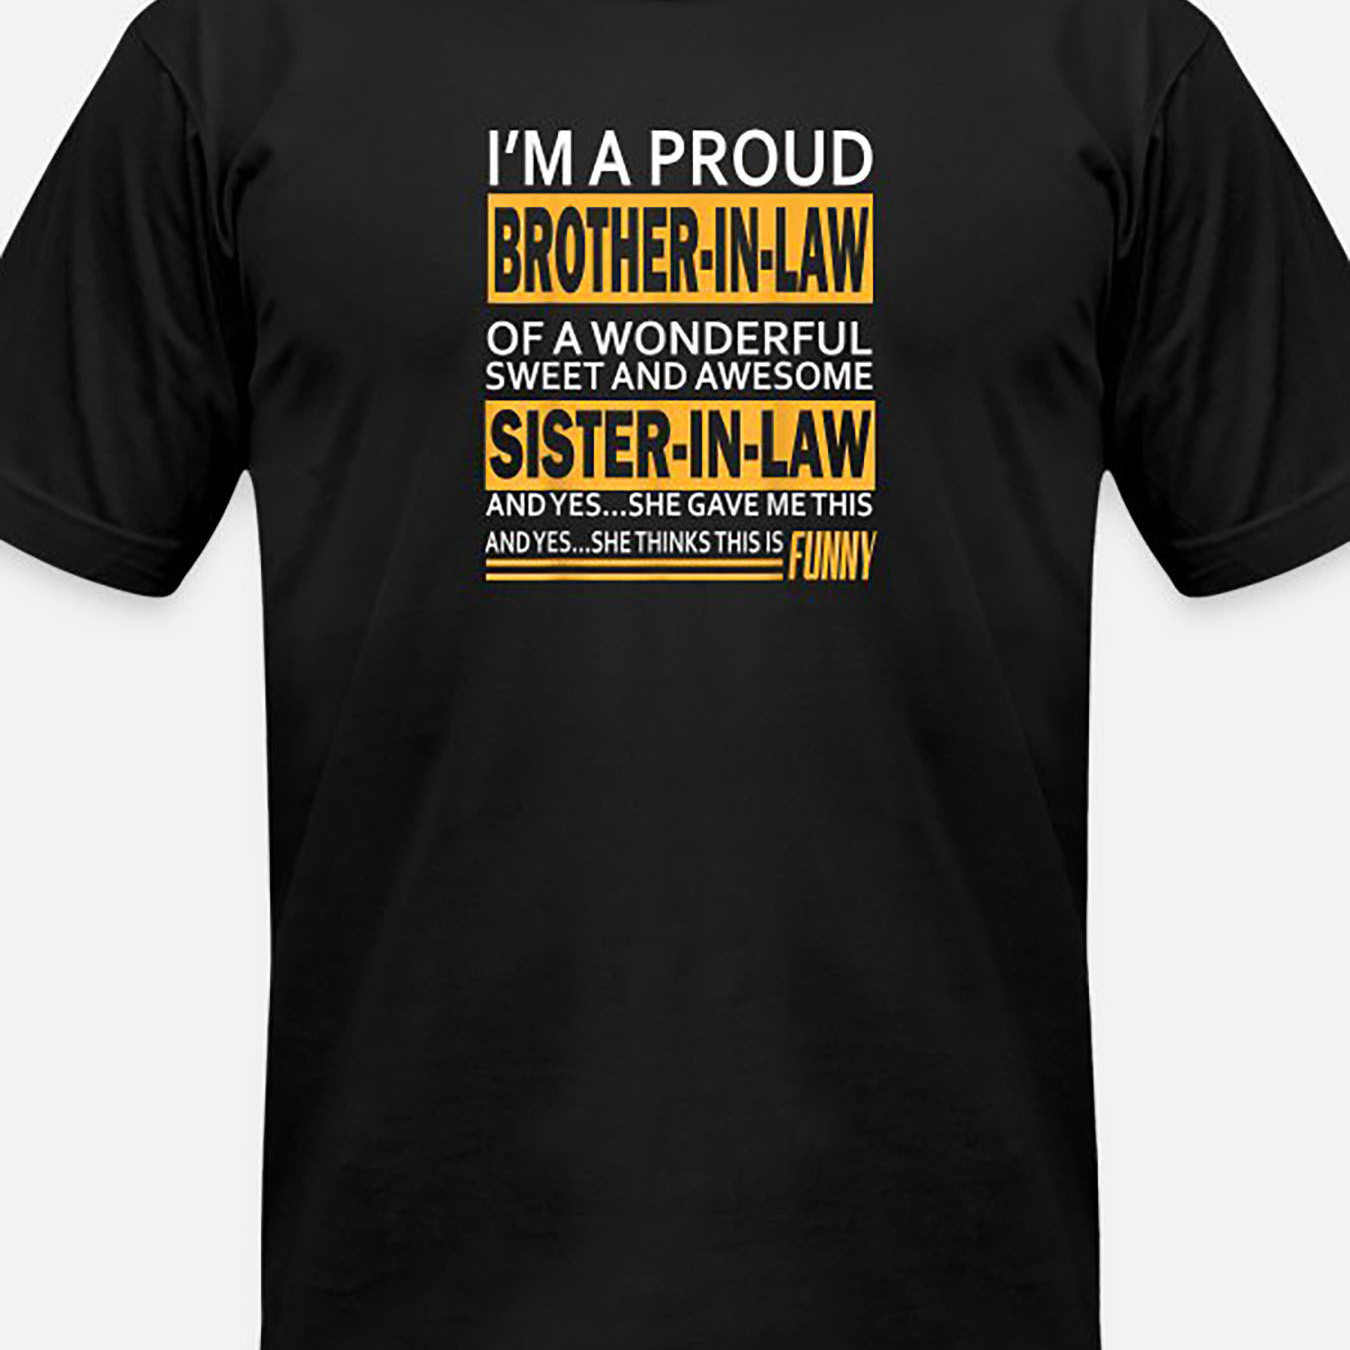 

Proud Brother In Law Gifts From Sister In Law-2763 Funny Men's Short Sleeve Graphic T-shirt Collection Black